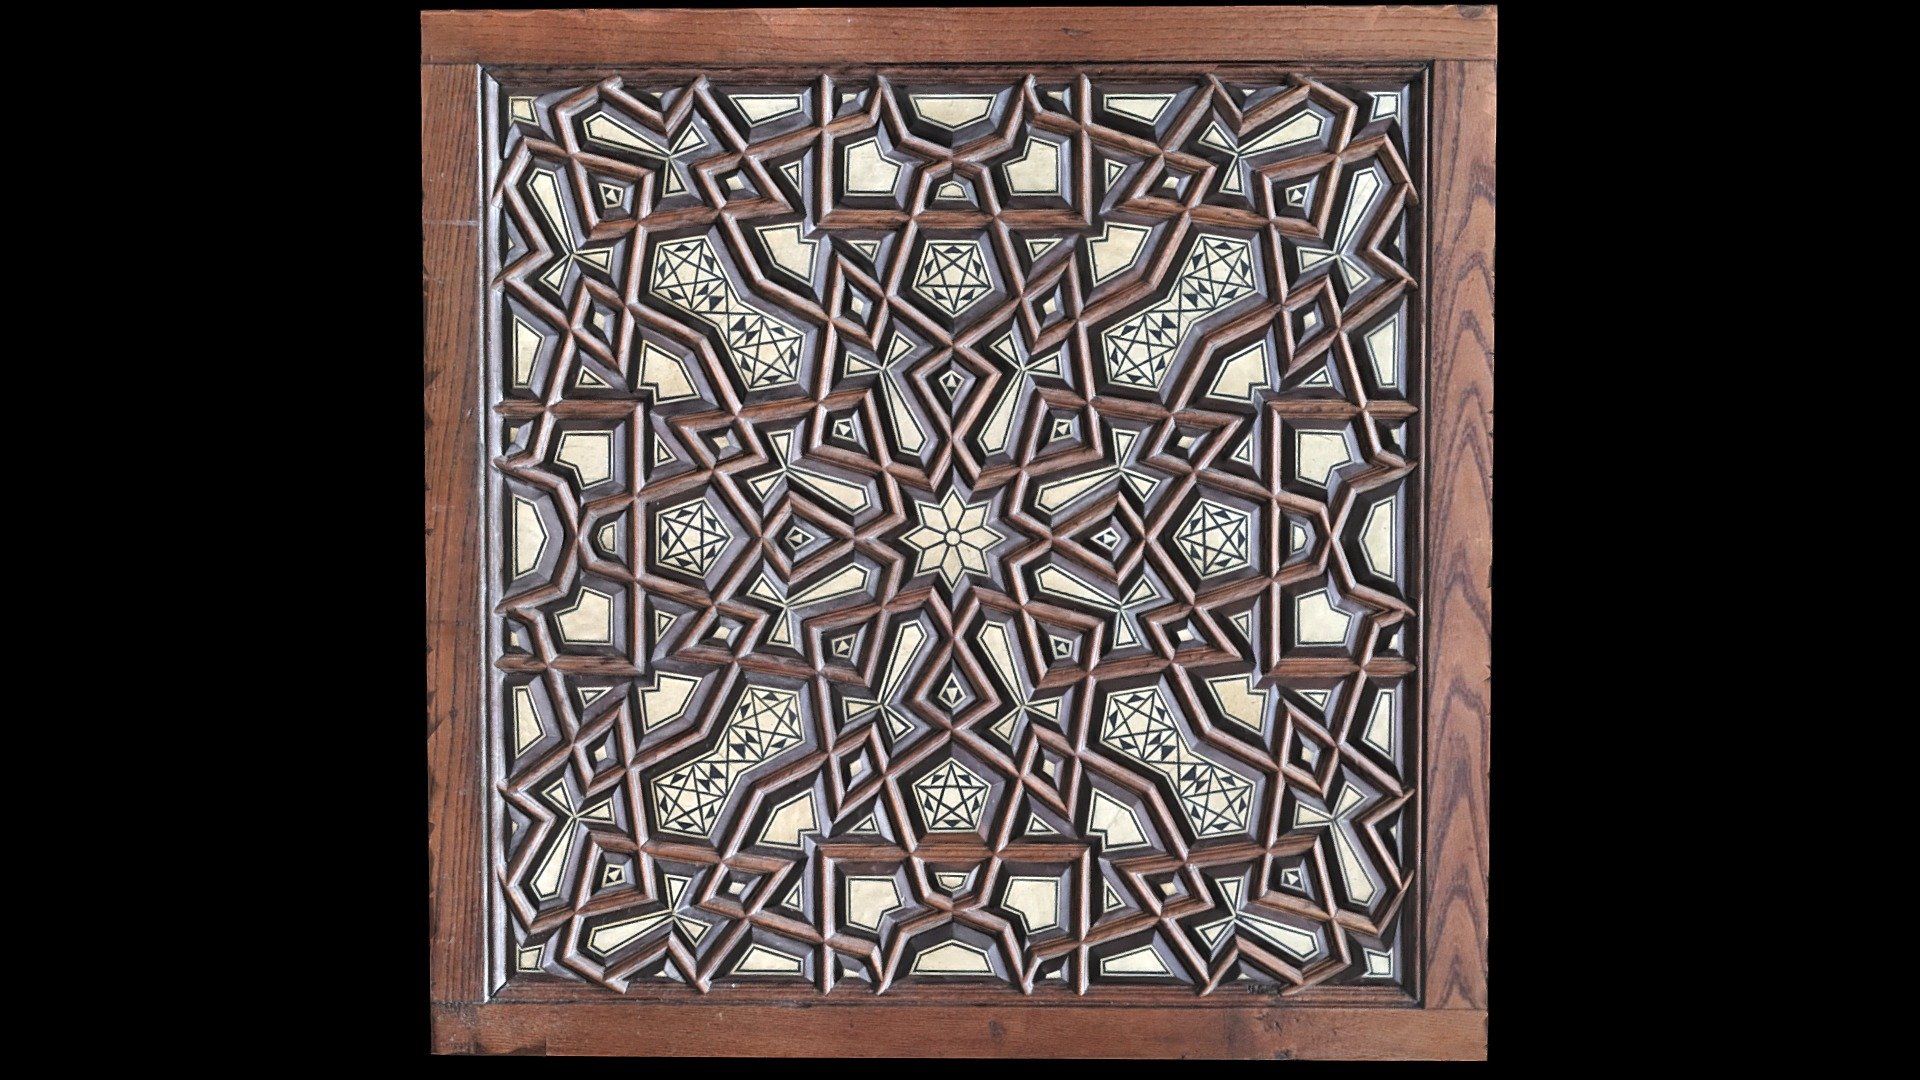 Islamic geometetric design on door panel in the Al-Rafa'i Mosque, Cairo, Egypt.  Panel is of wood and bone/ivory and is approximately 24 x 24 inches (61 x 61 cm).  Construction of the mosque dates to the mid-19th - early 20th centuries A.D.

Created from 48 photographs (Canon EOS T7i) using Metashape 1.8.4.  Decimated from orignal 2.9M poly face mesh.  Photographed in January 2023 3d model